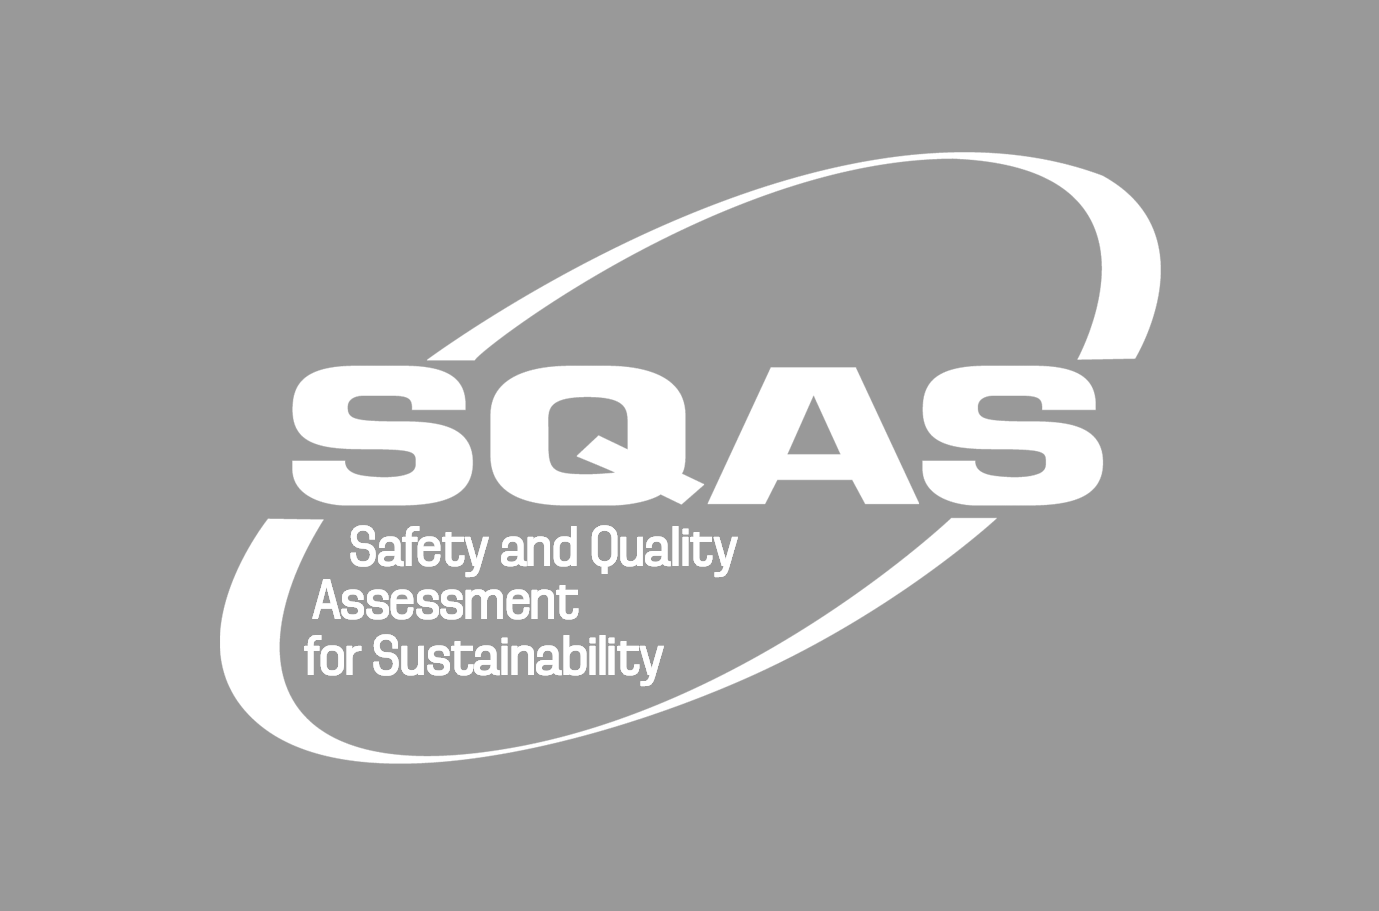 Safety and Quality Assessment for Sustainability